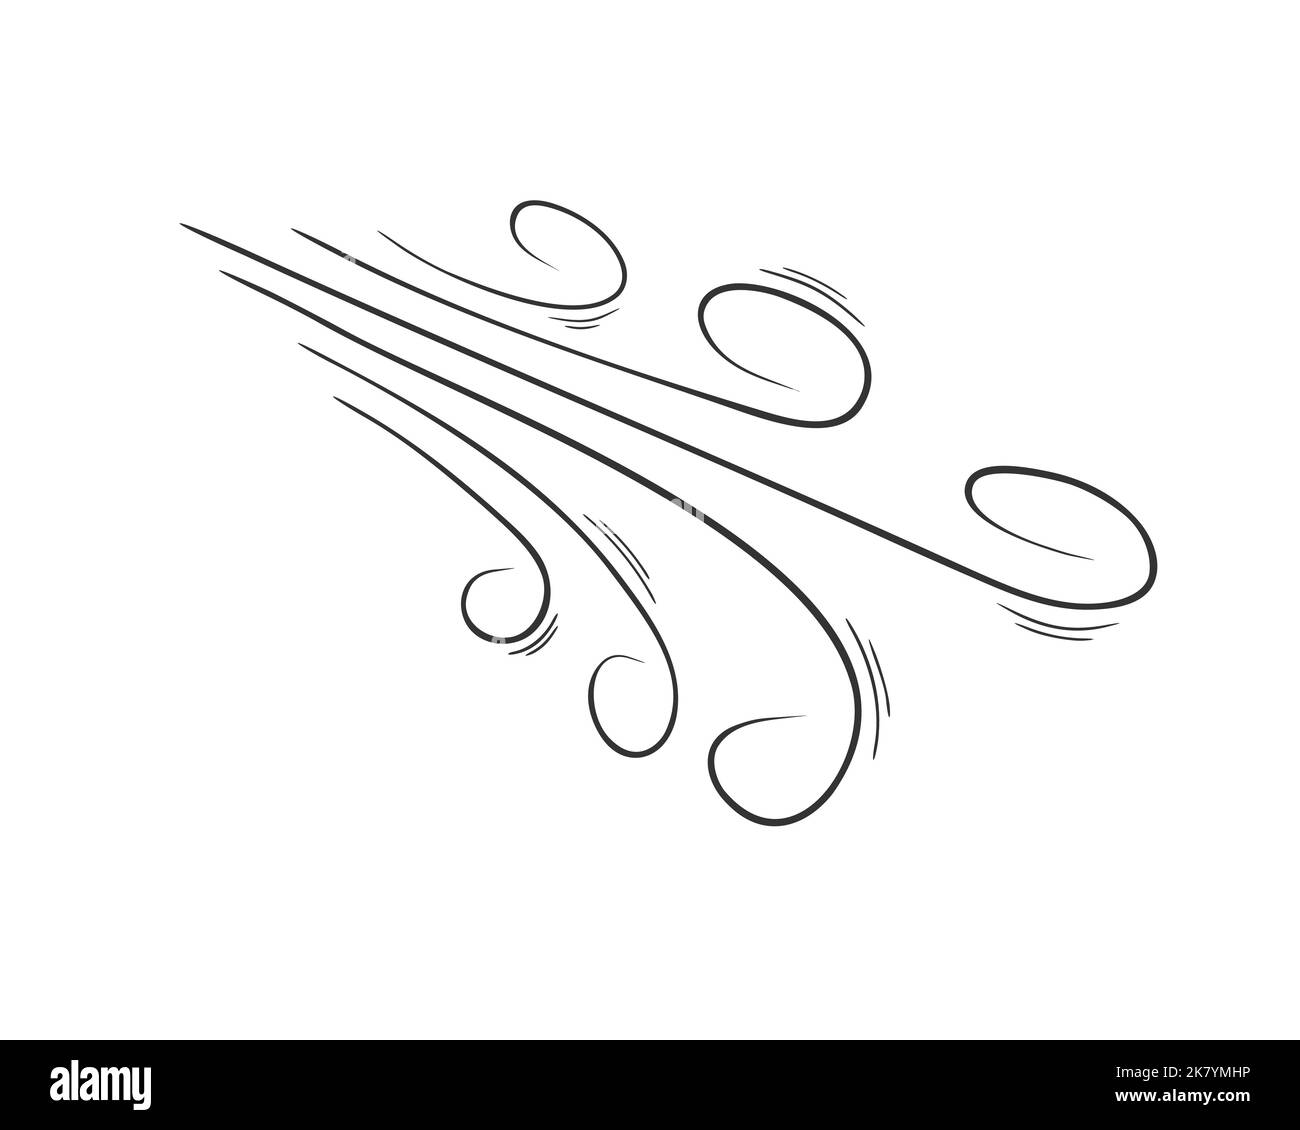 Air flow or wind blow doodle swirls. Gust, smoke, dust hand drawn effect isolated on white background. Vector outline illustration. Stock Vector